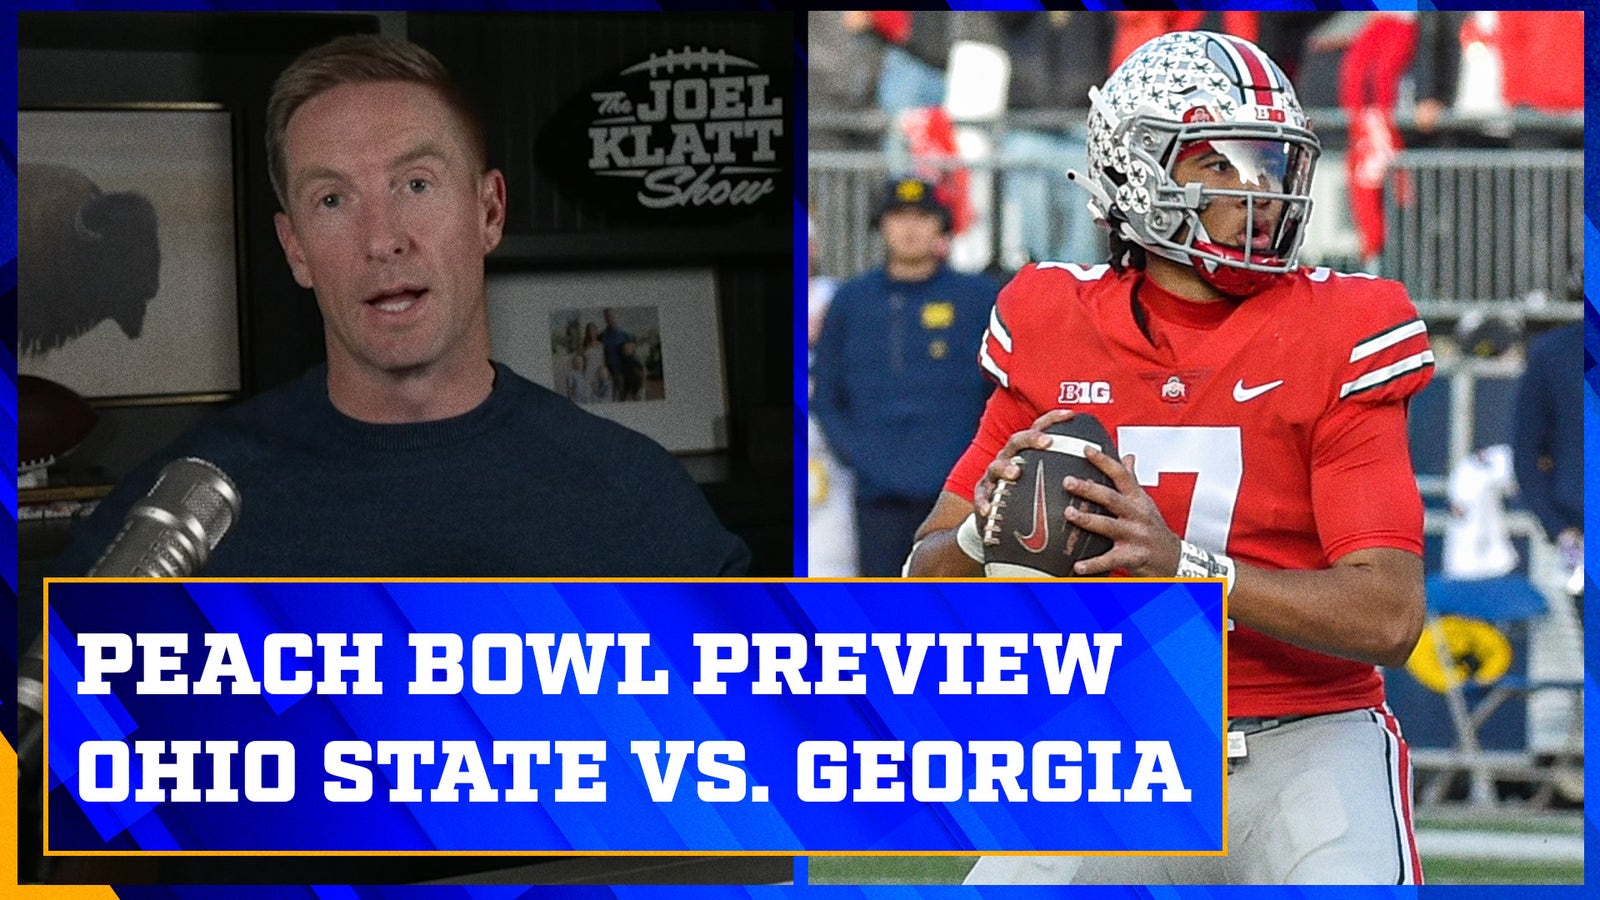 Why the Peach Bowl is a rough matchup for BOTH teams